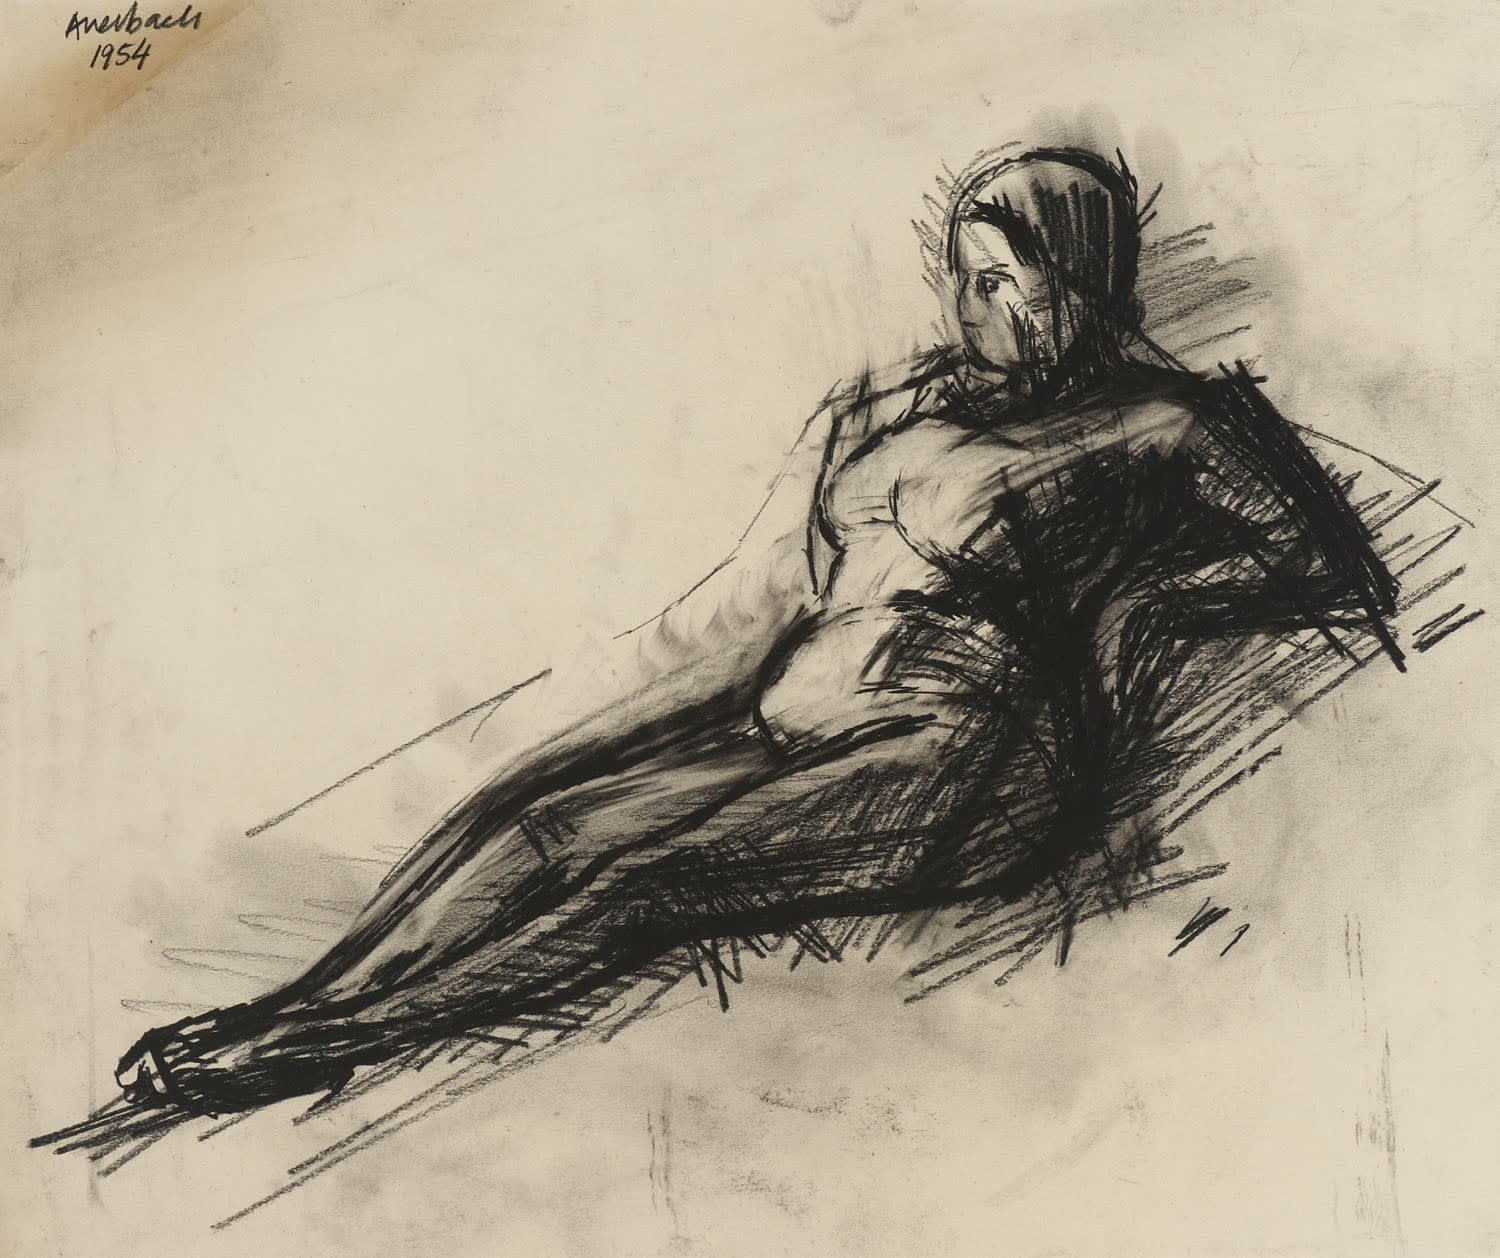 Frank Auerbach (1931- ) Nude 1954 Charcoal on paper 45.5 x 54.5 cm Ben Uri Collection © Frank Auerbach, courtesy Marlborough Fine Art To see and discover more about this artist click here